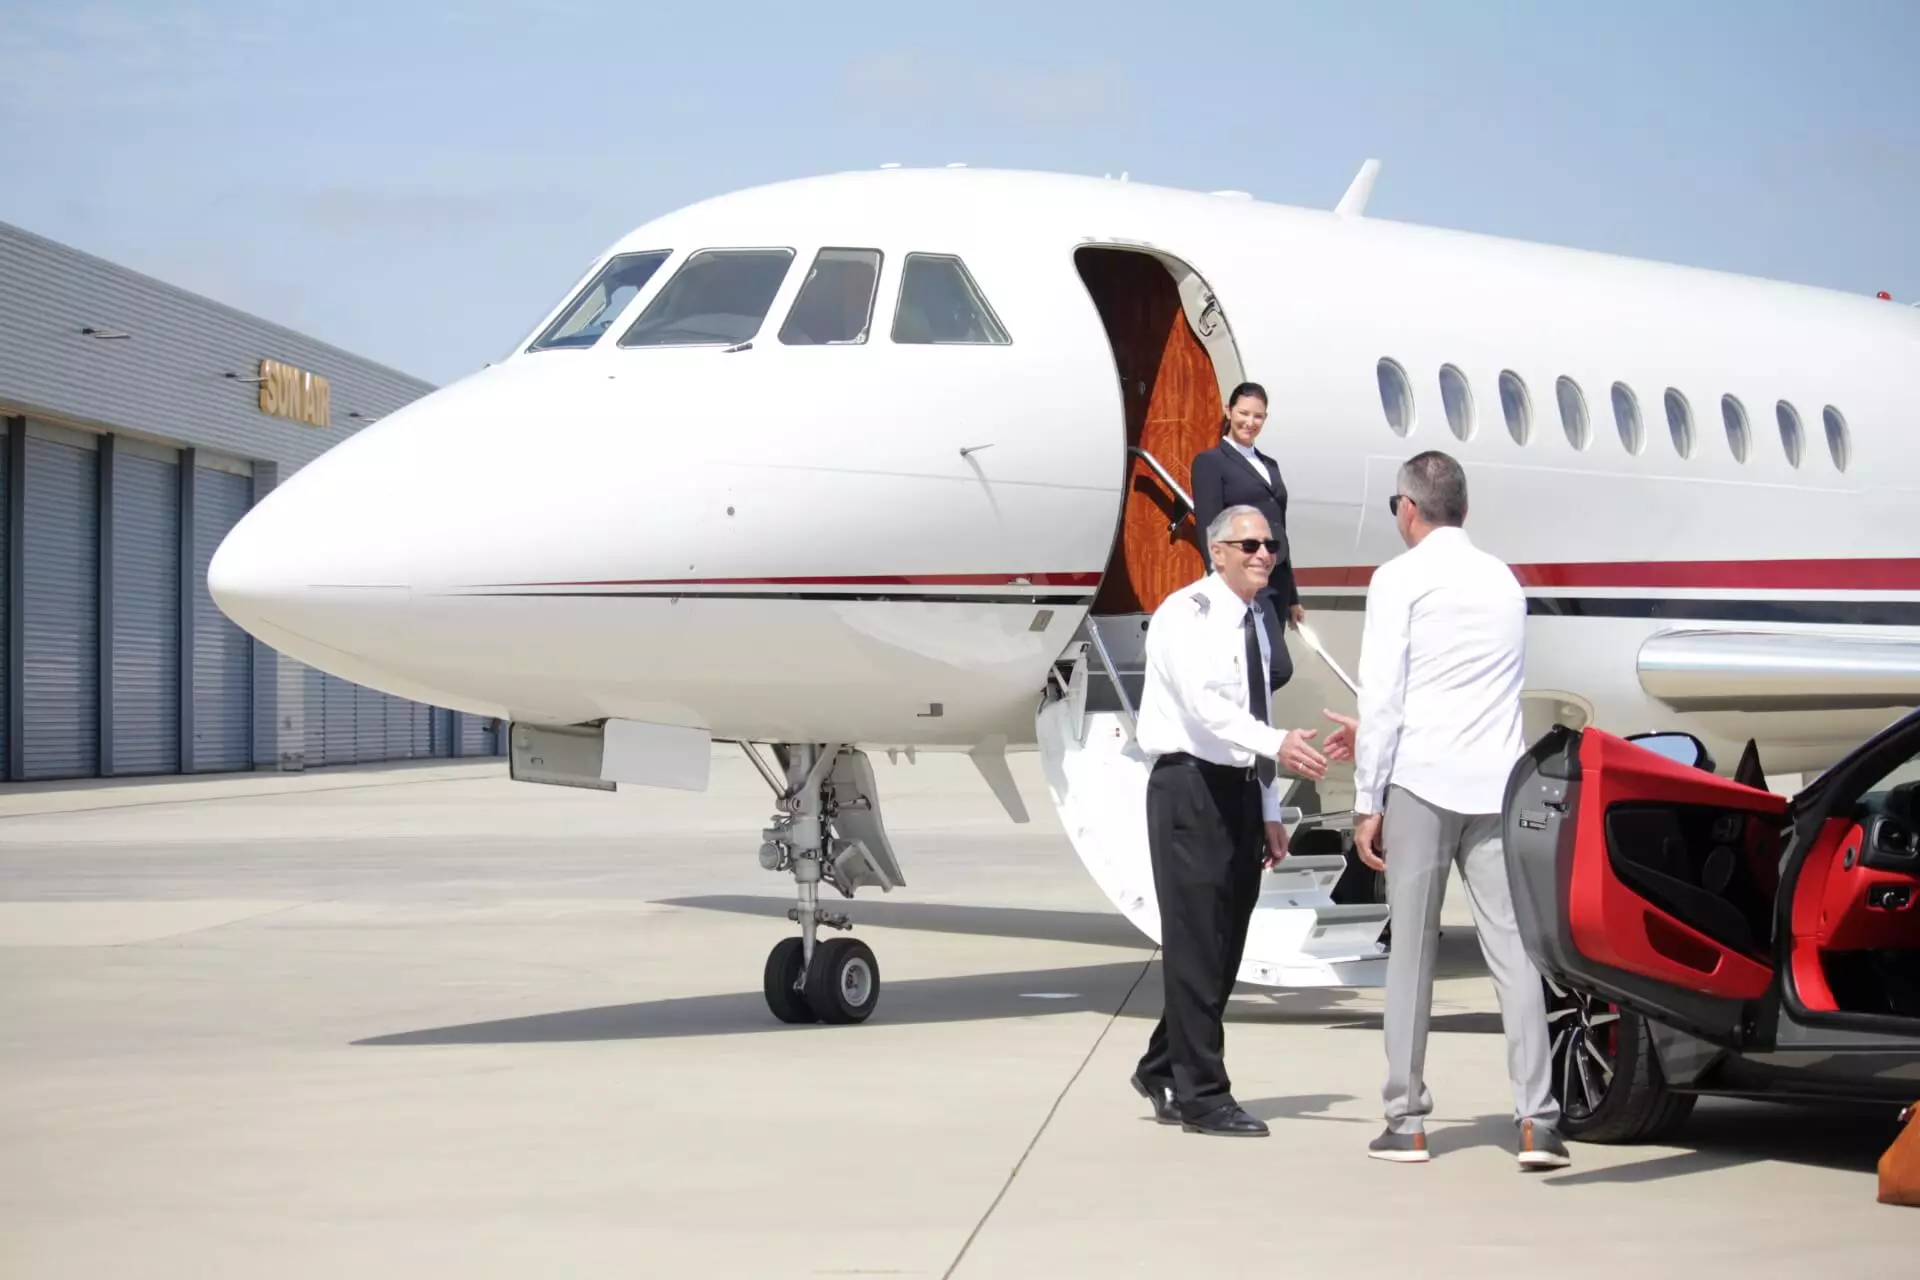 People exiting a vehicle greeting a pilot of a private jet